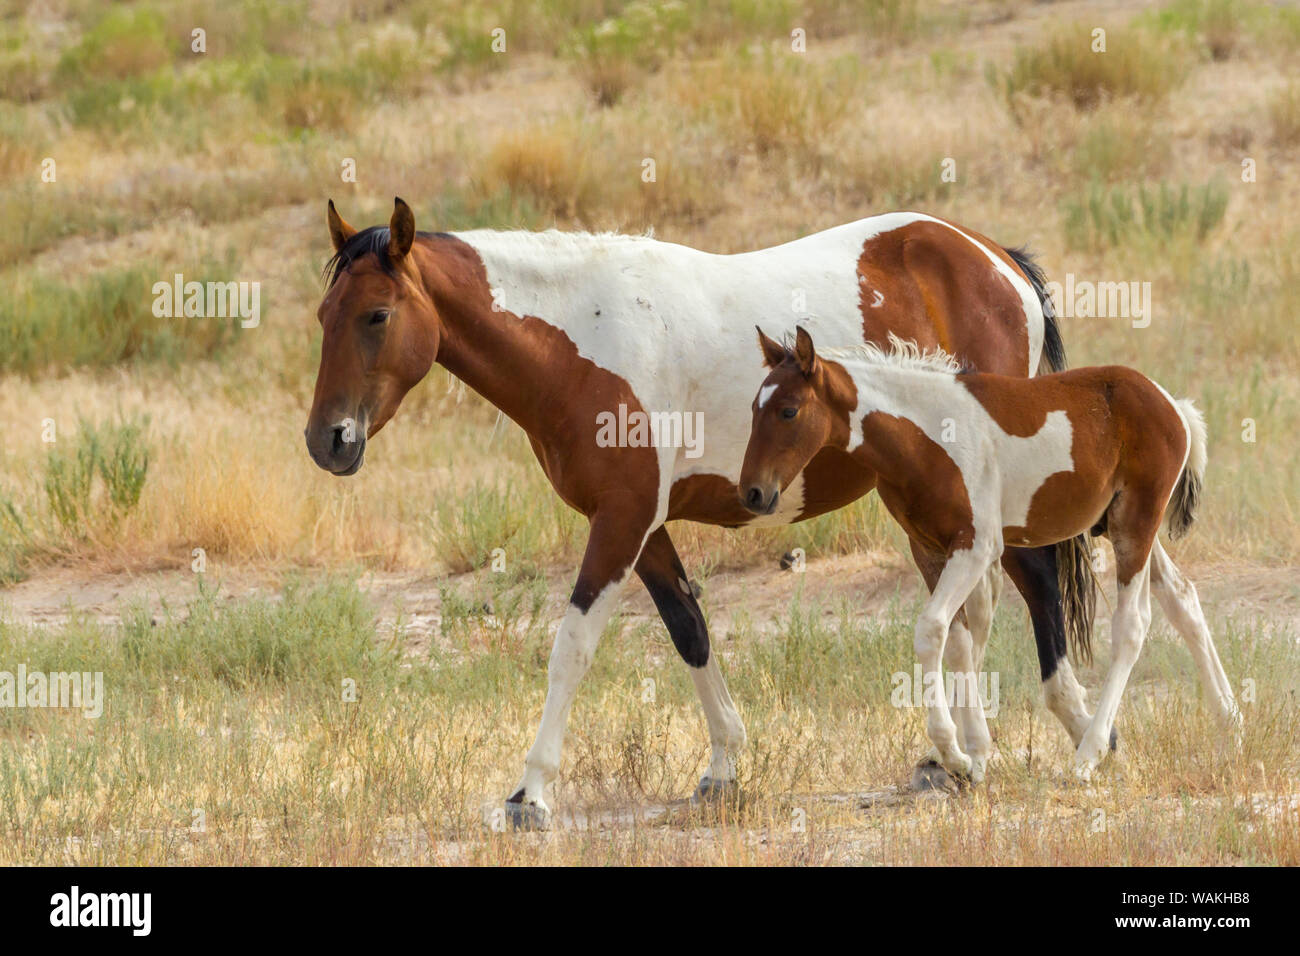 USA, Utah, Tooele County. Wild mare horse and colt. Credit as: Cathy and Gordon Illg / Jaynes Gallery / DanitaDelimont.com Stock Photo